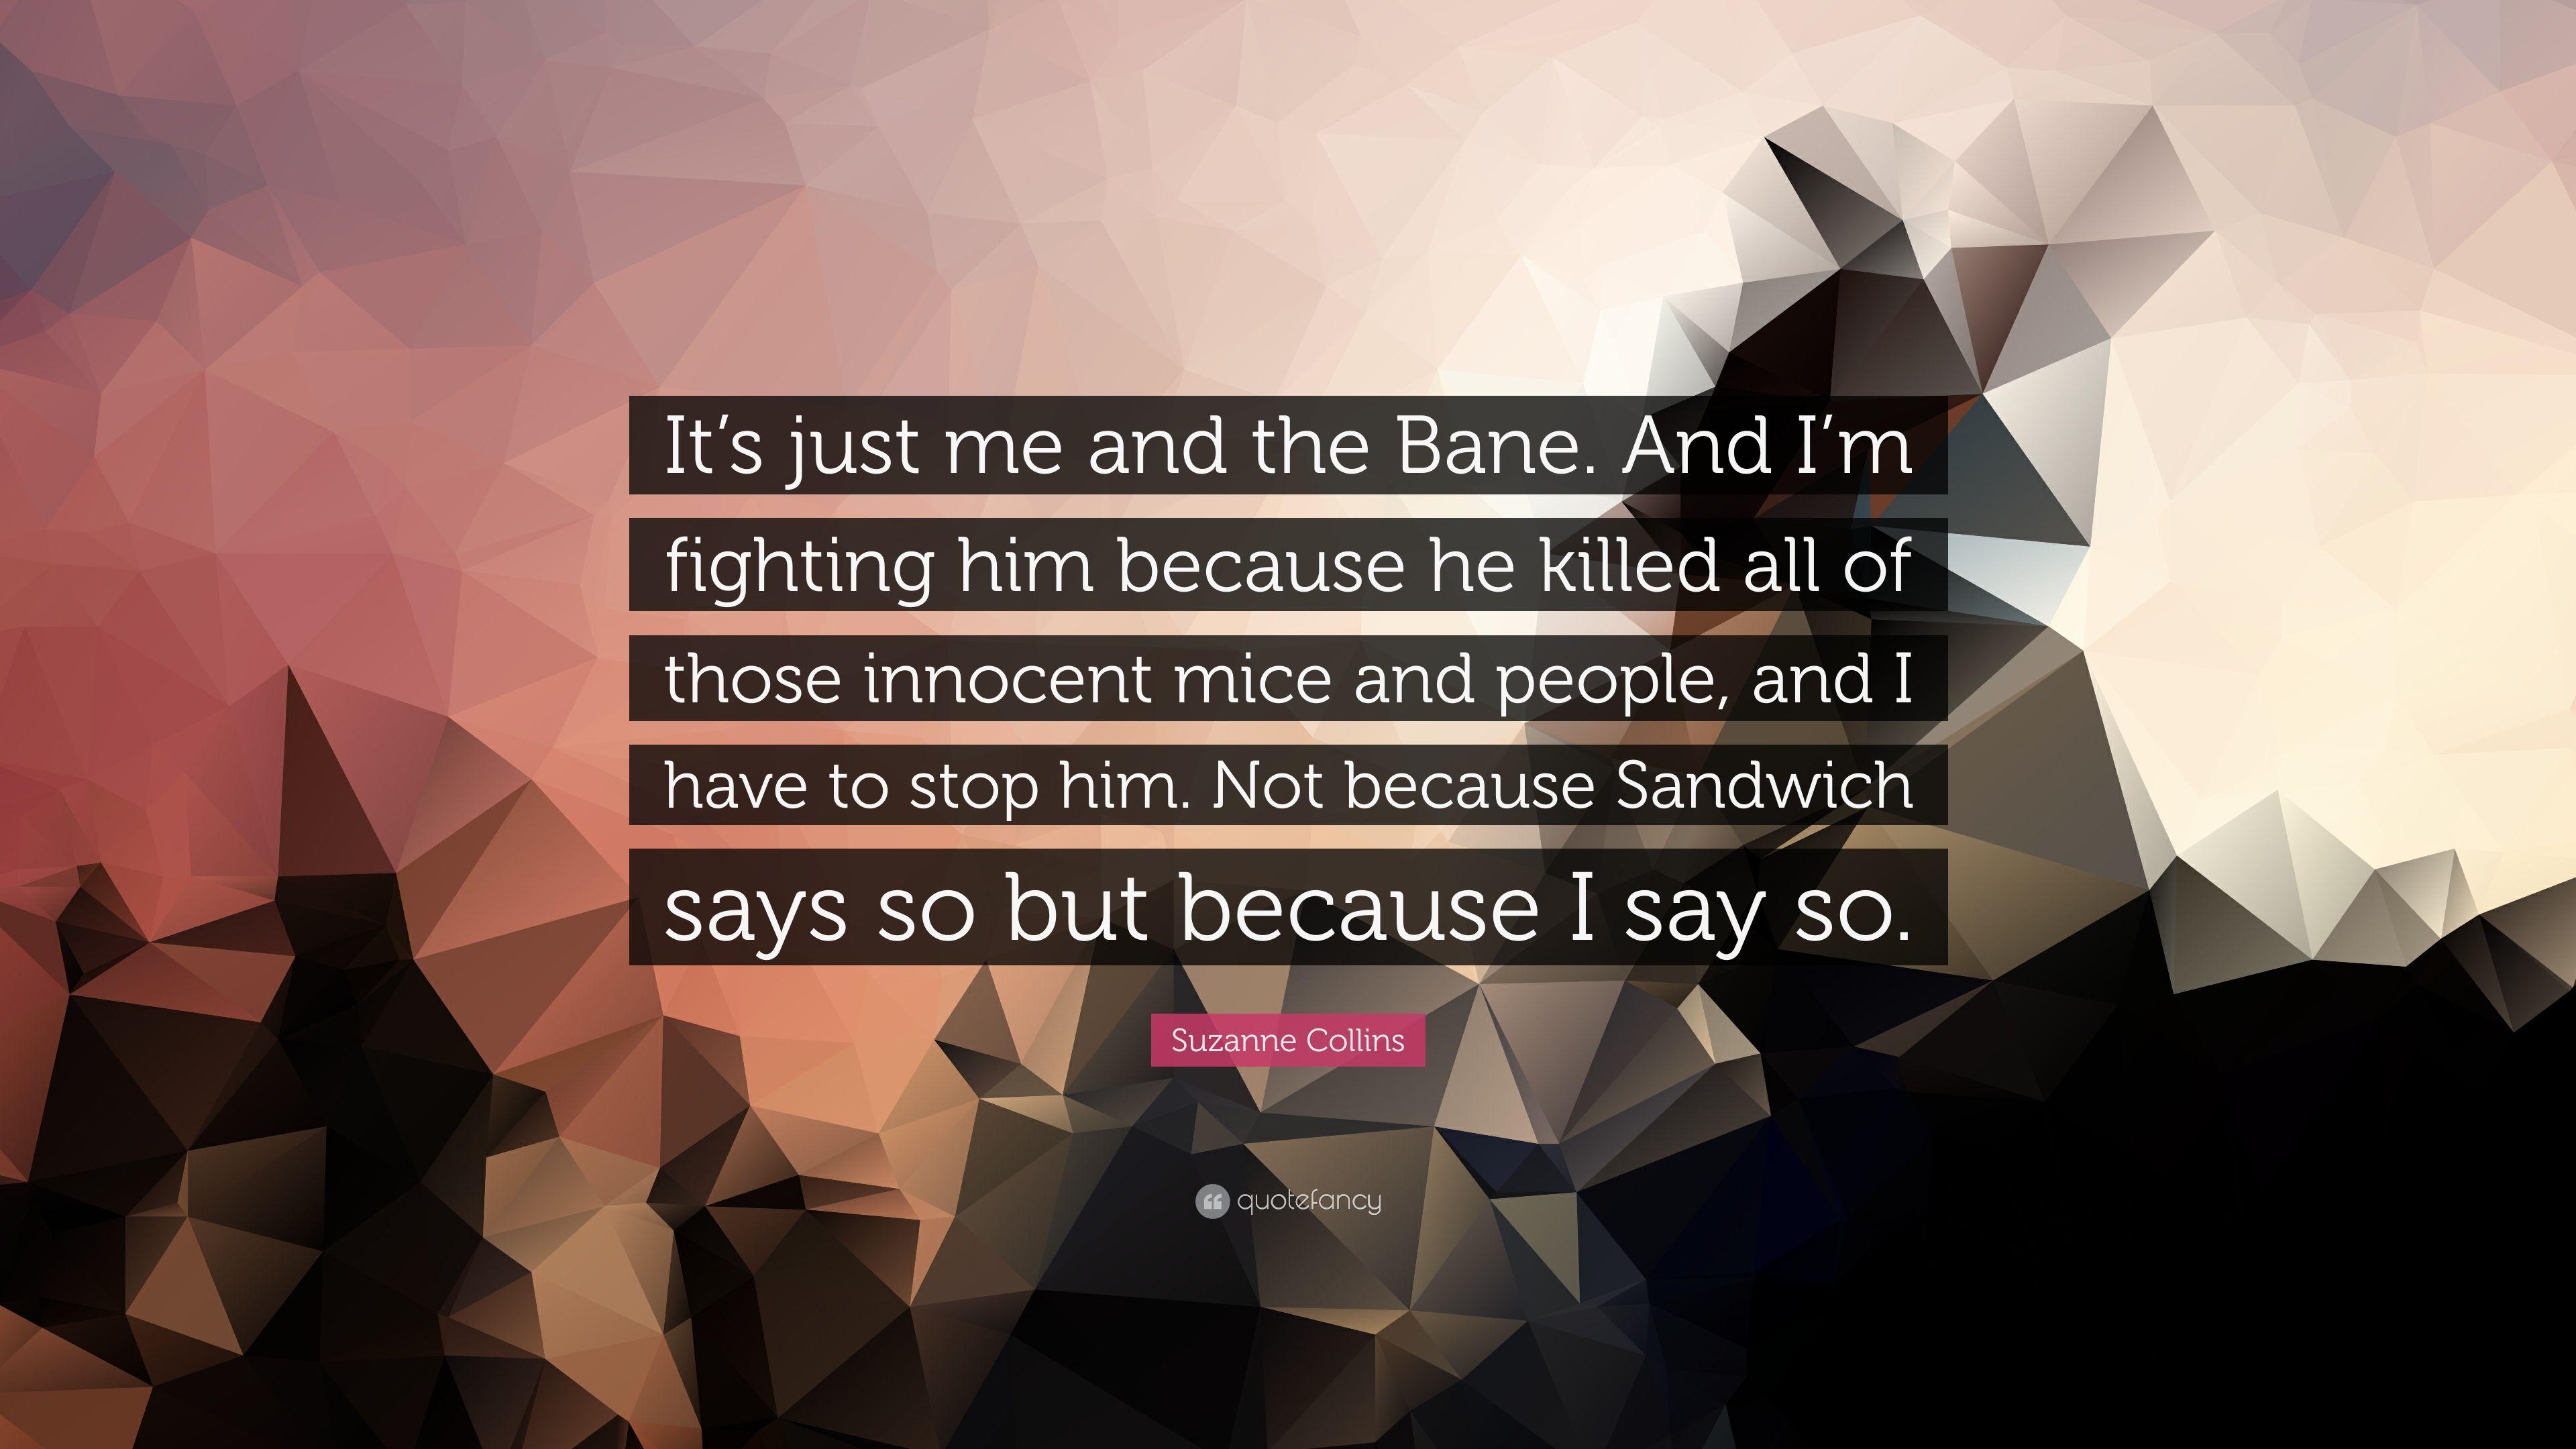 Suzanne Collins Quote: “It's just me and the Bane. And I'm